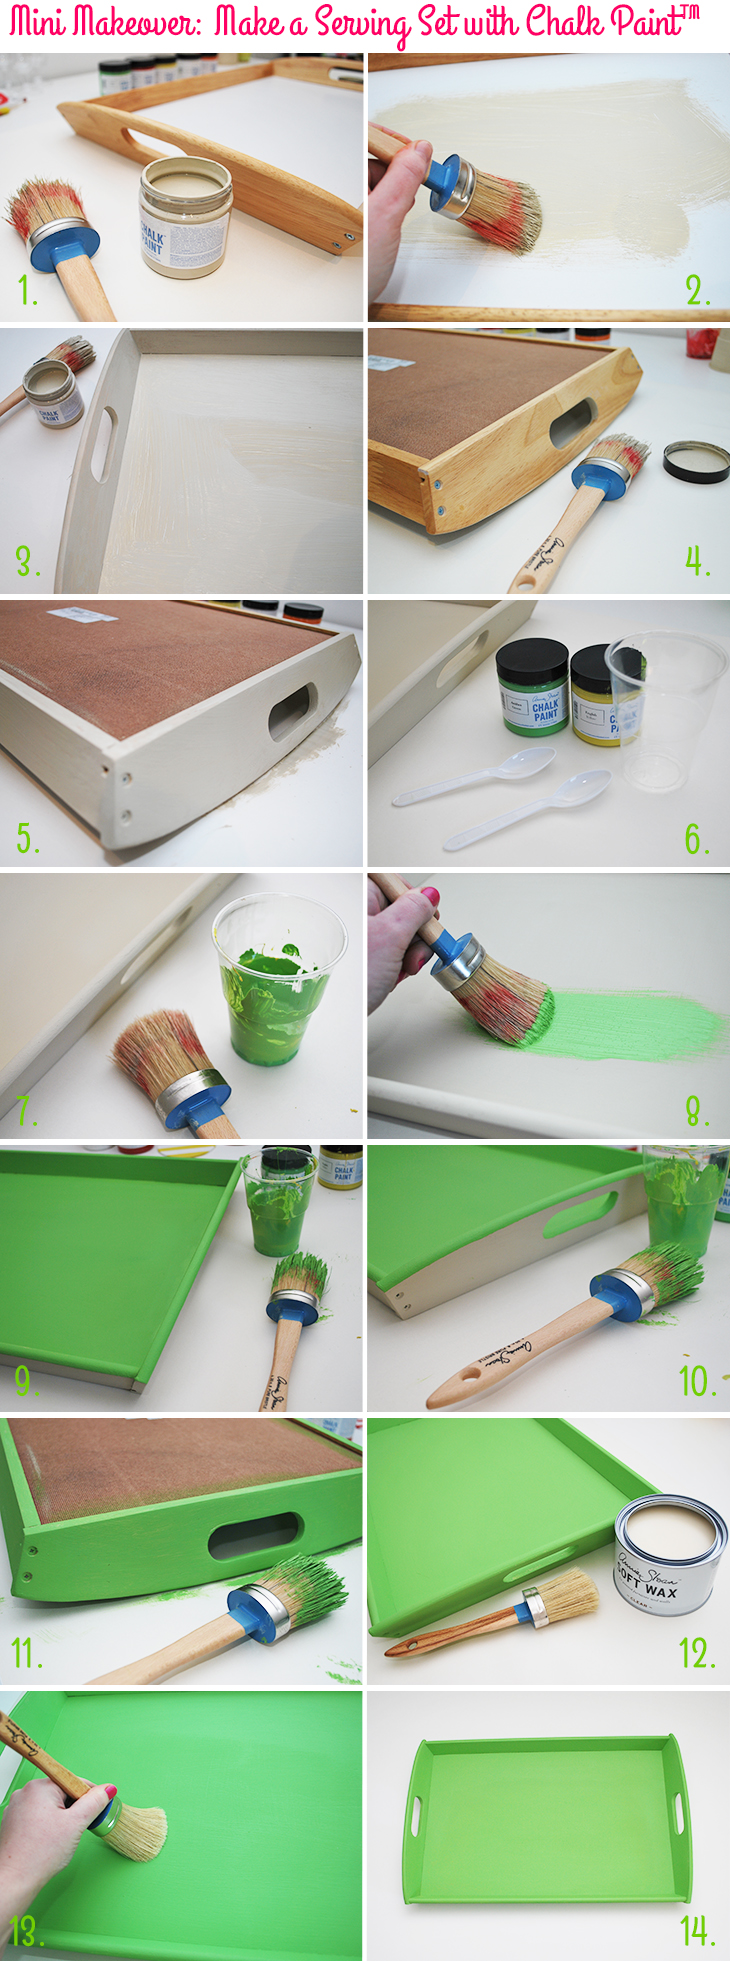 Mini Makeover: Make a Serving Set with Chalk Paint™ - Serving Tray on Style for a Happy Home // Click for DIY instructions